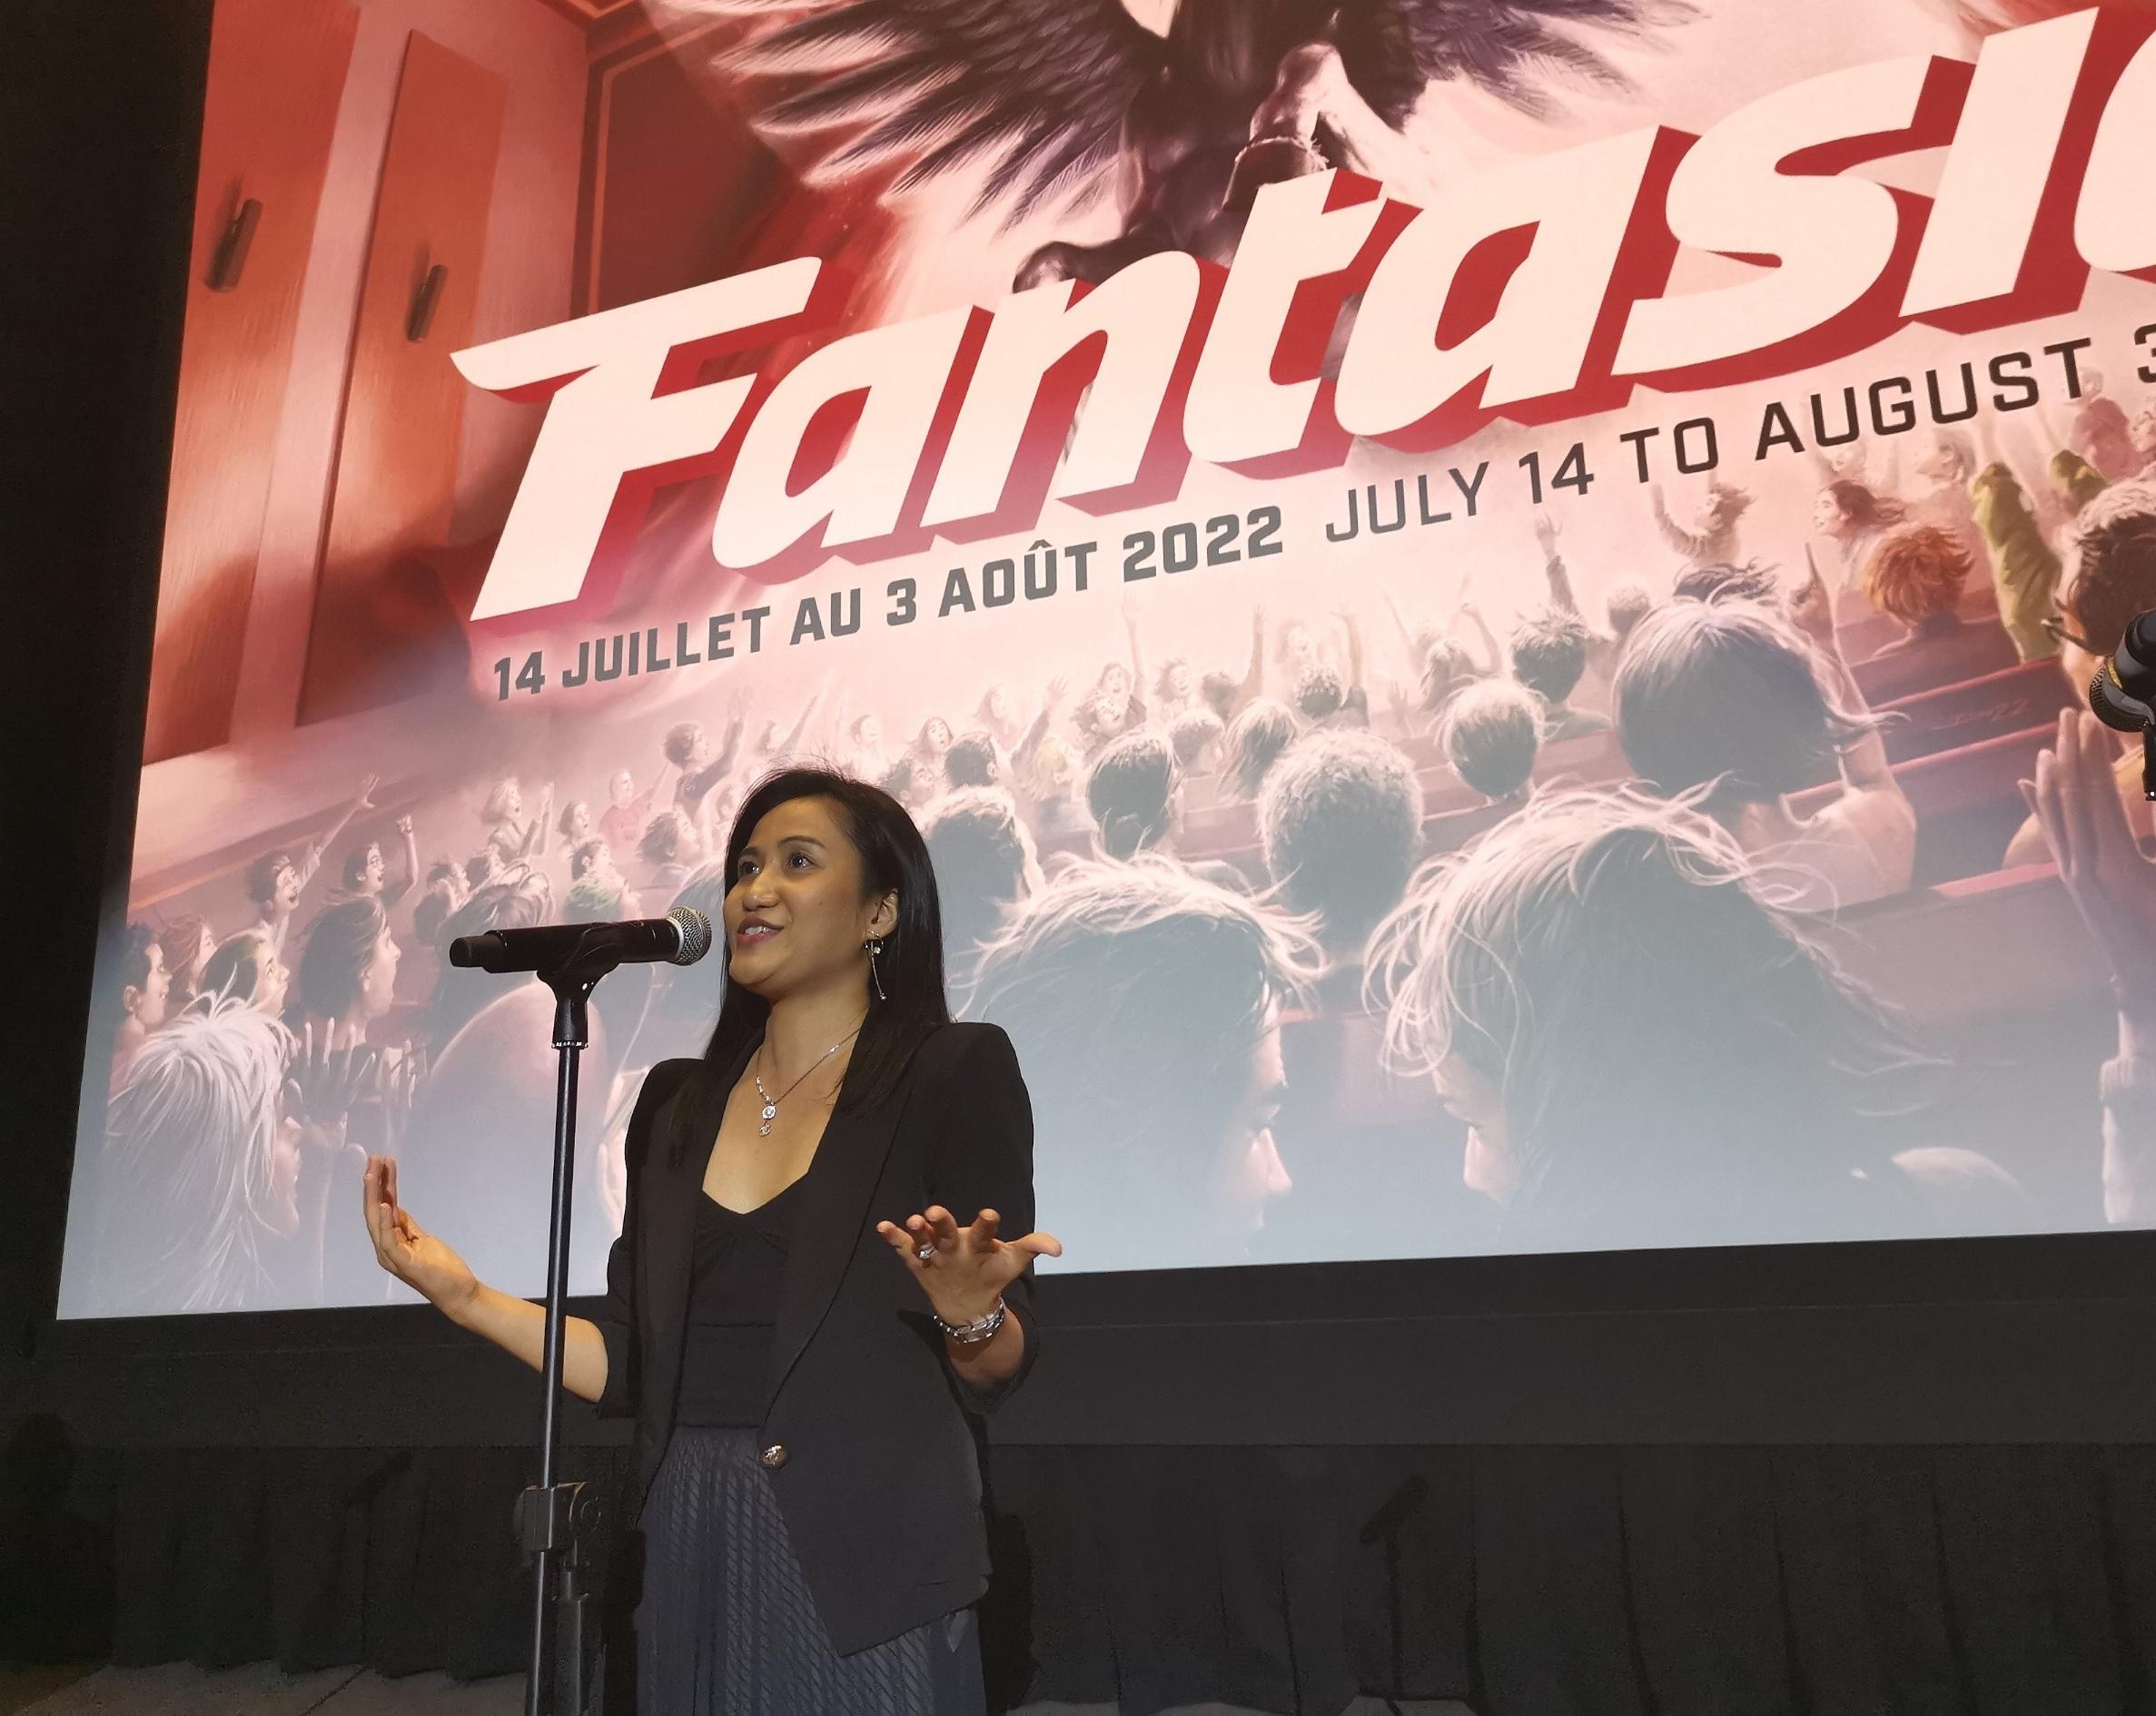 The Director of the Hong Kong Economic and Trade Office (Toronto), Ms Emily Mo, speaks before the screening of the movie "Hard Boiled" directed by Hong Kong Director Mr John Woo at the Concordia Hall Theatre in Montreal, Canada, on July 15 (Montreal time).